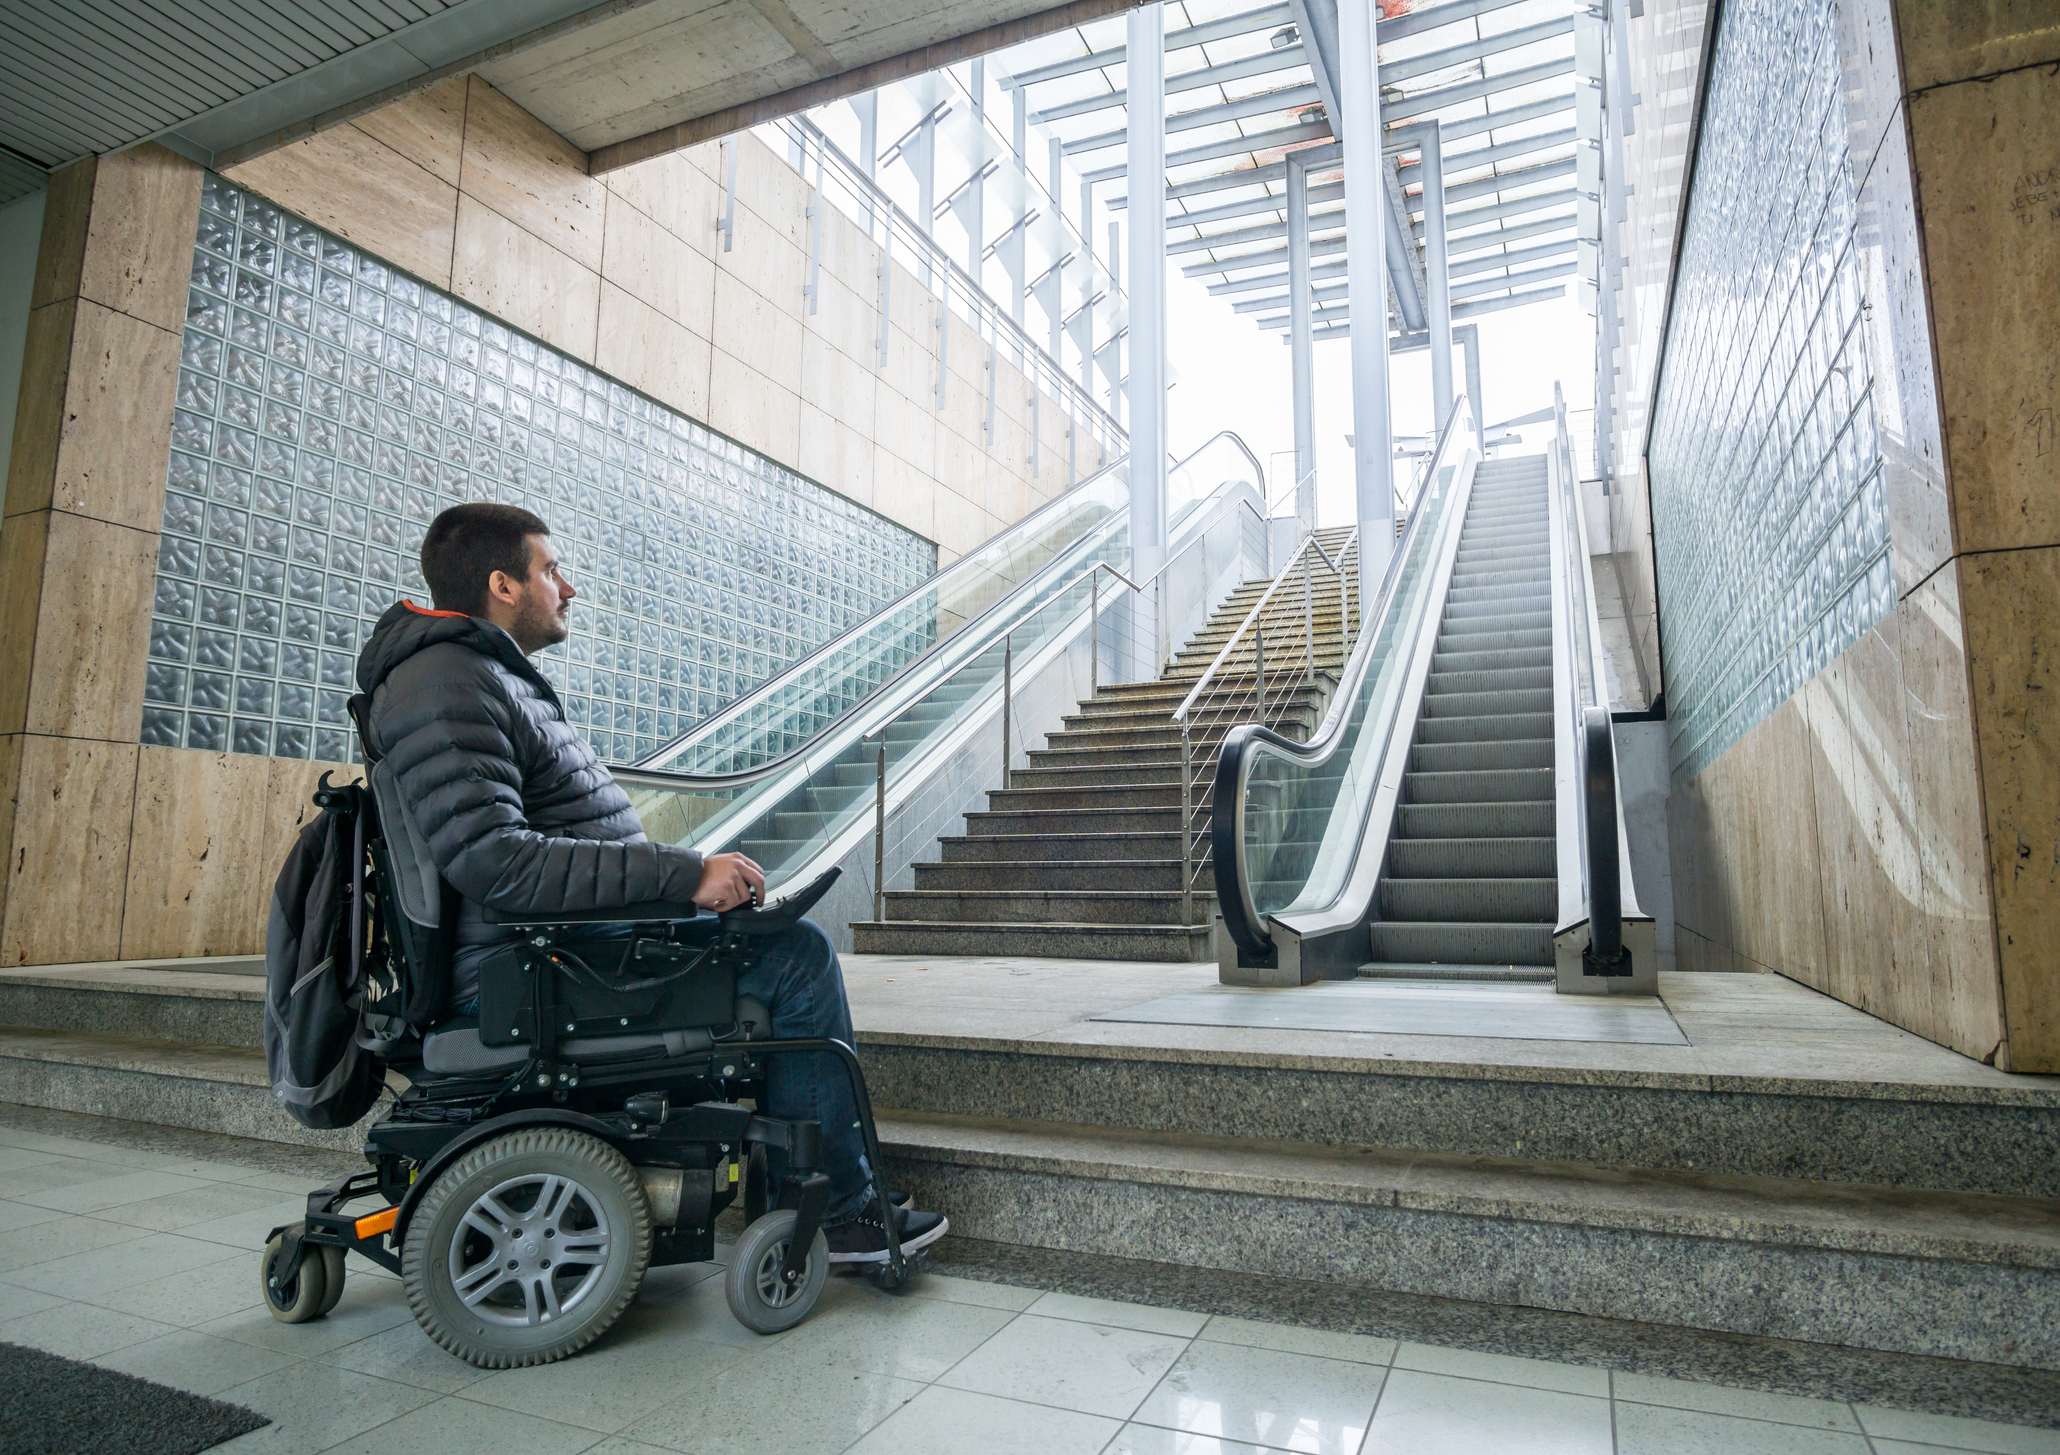 Disabled Man On Wheelchair In Front Of escalator and staircase